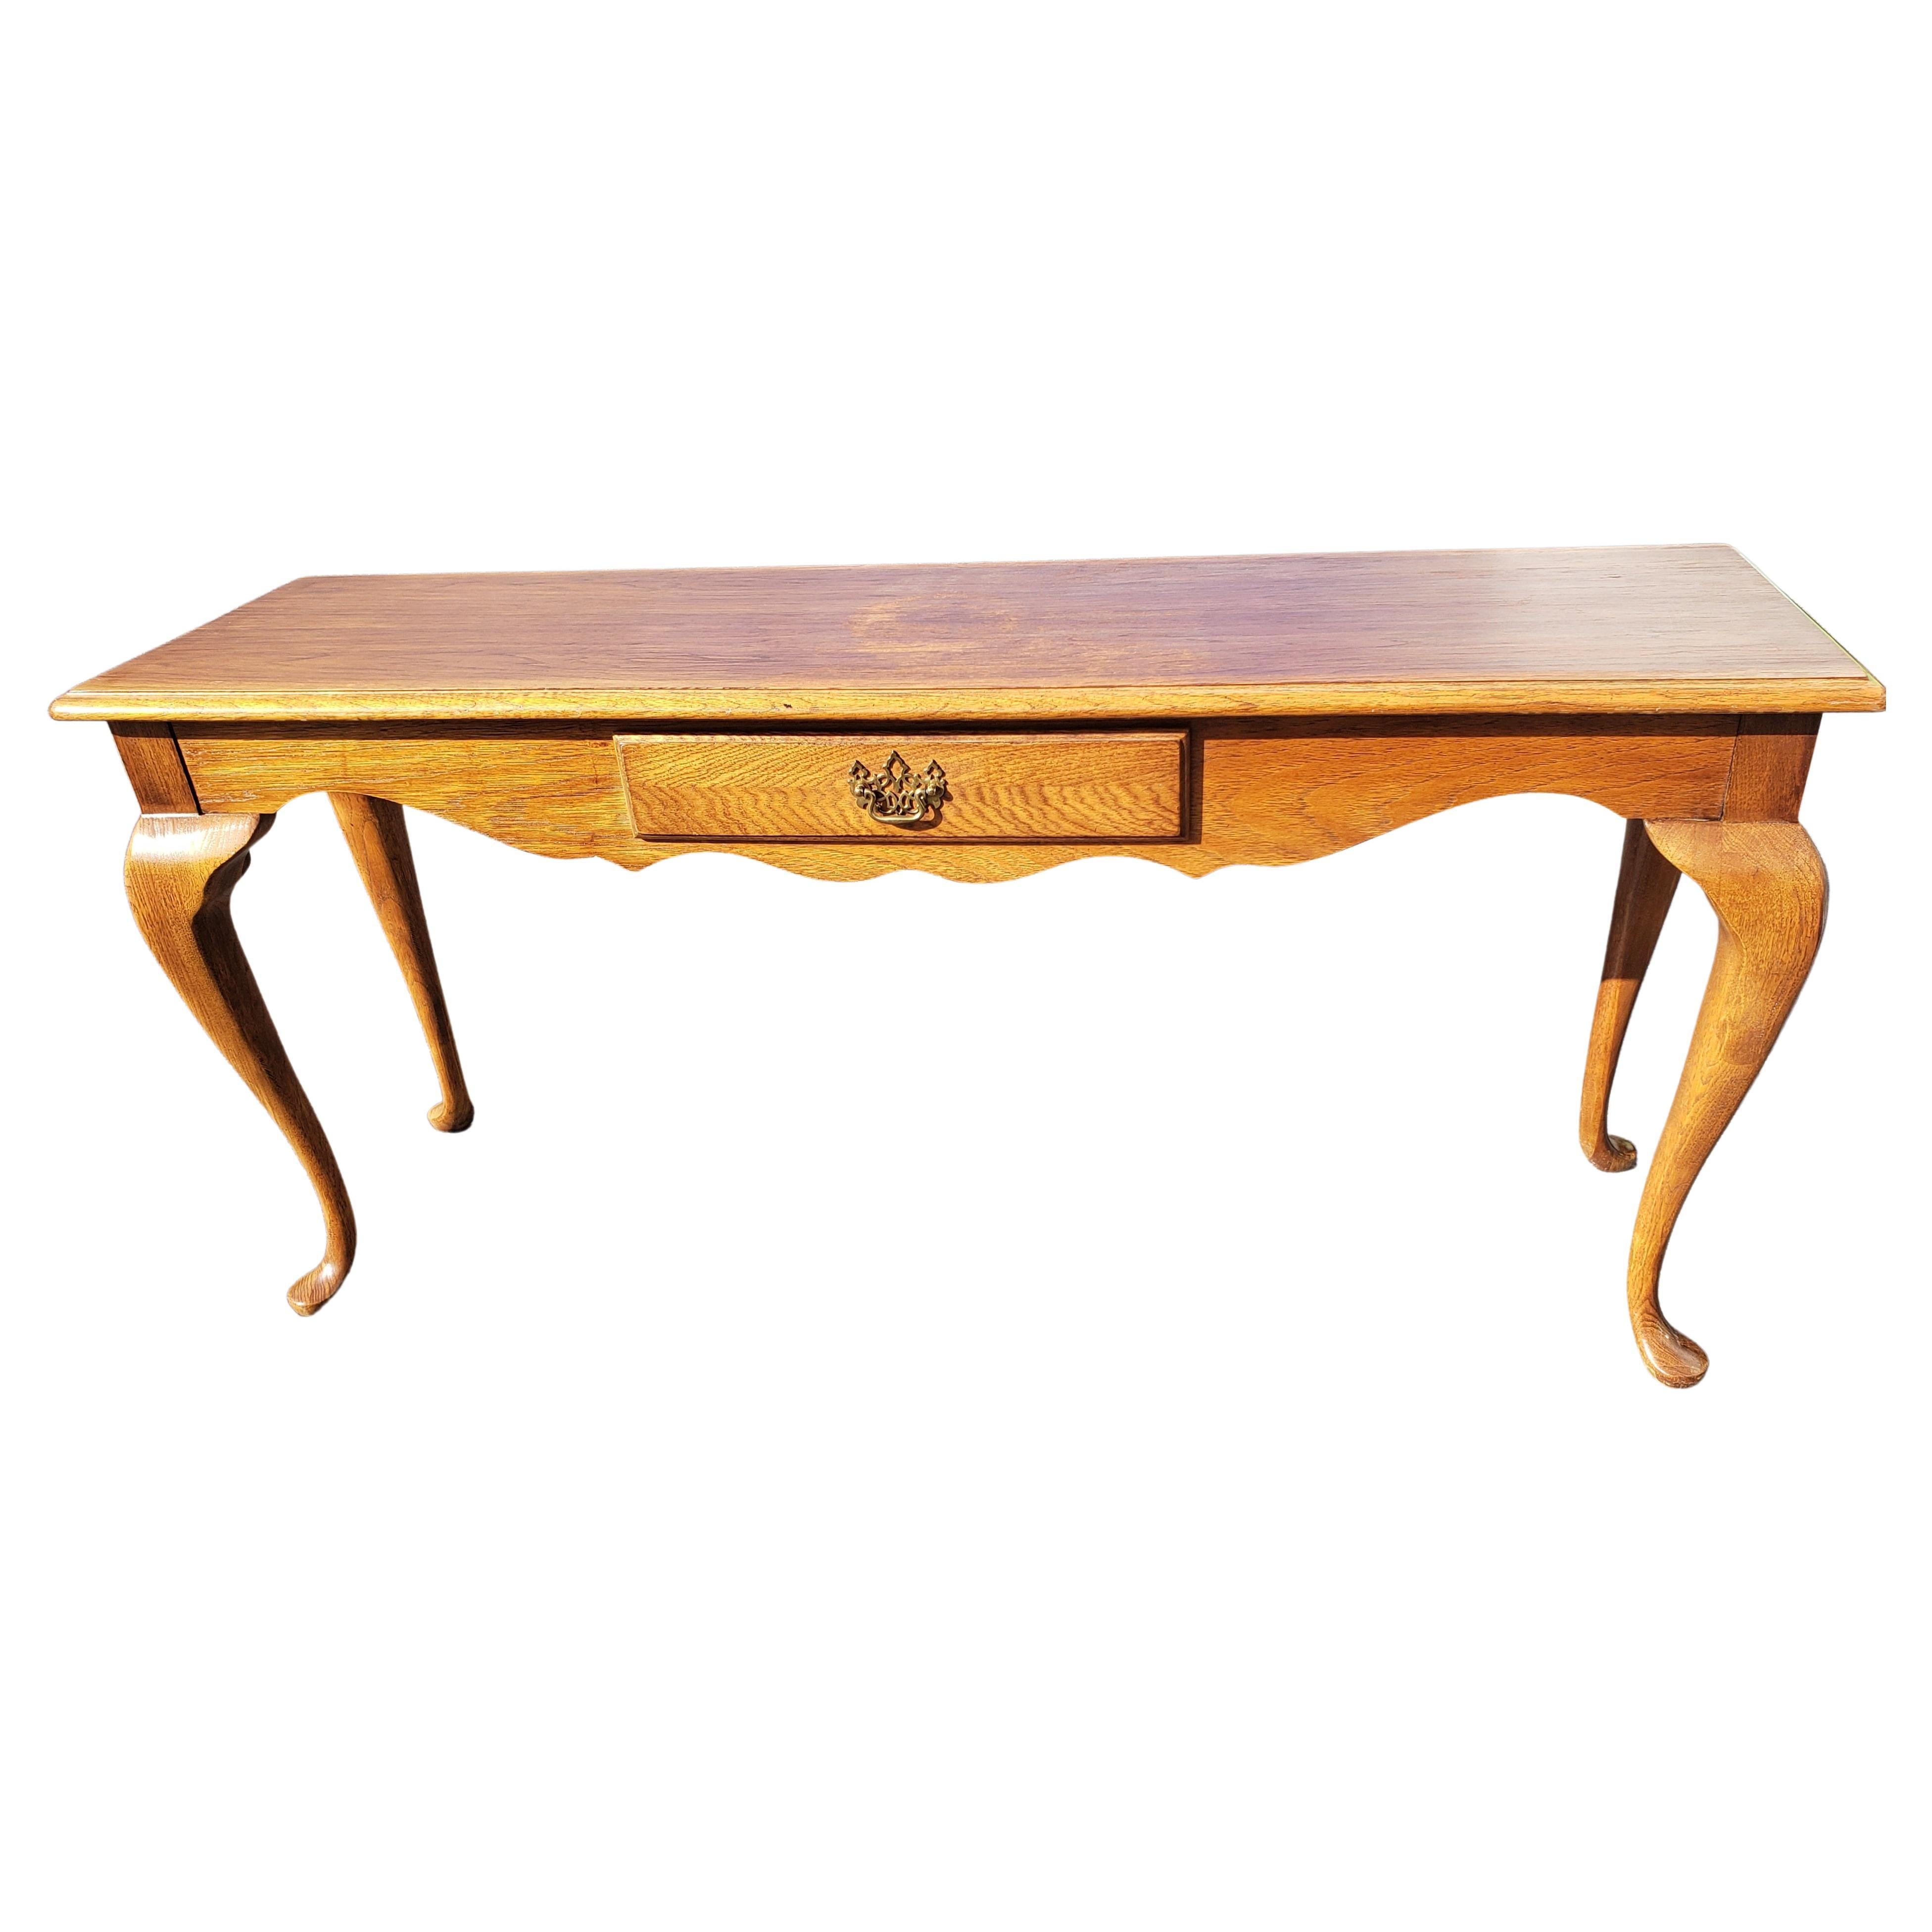 20th Century Thomasville Queen Anne Console Table Sofa Table, Circa 1970s For Sale